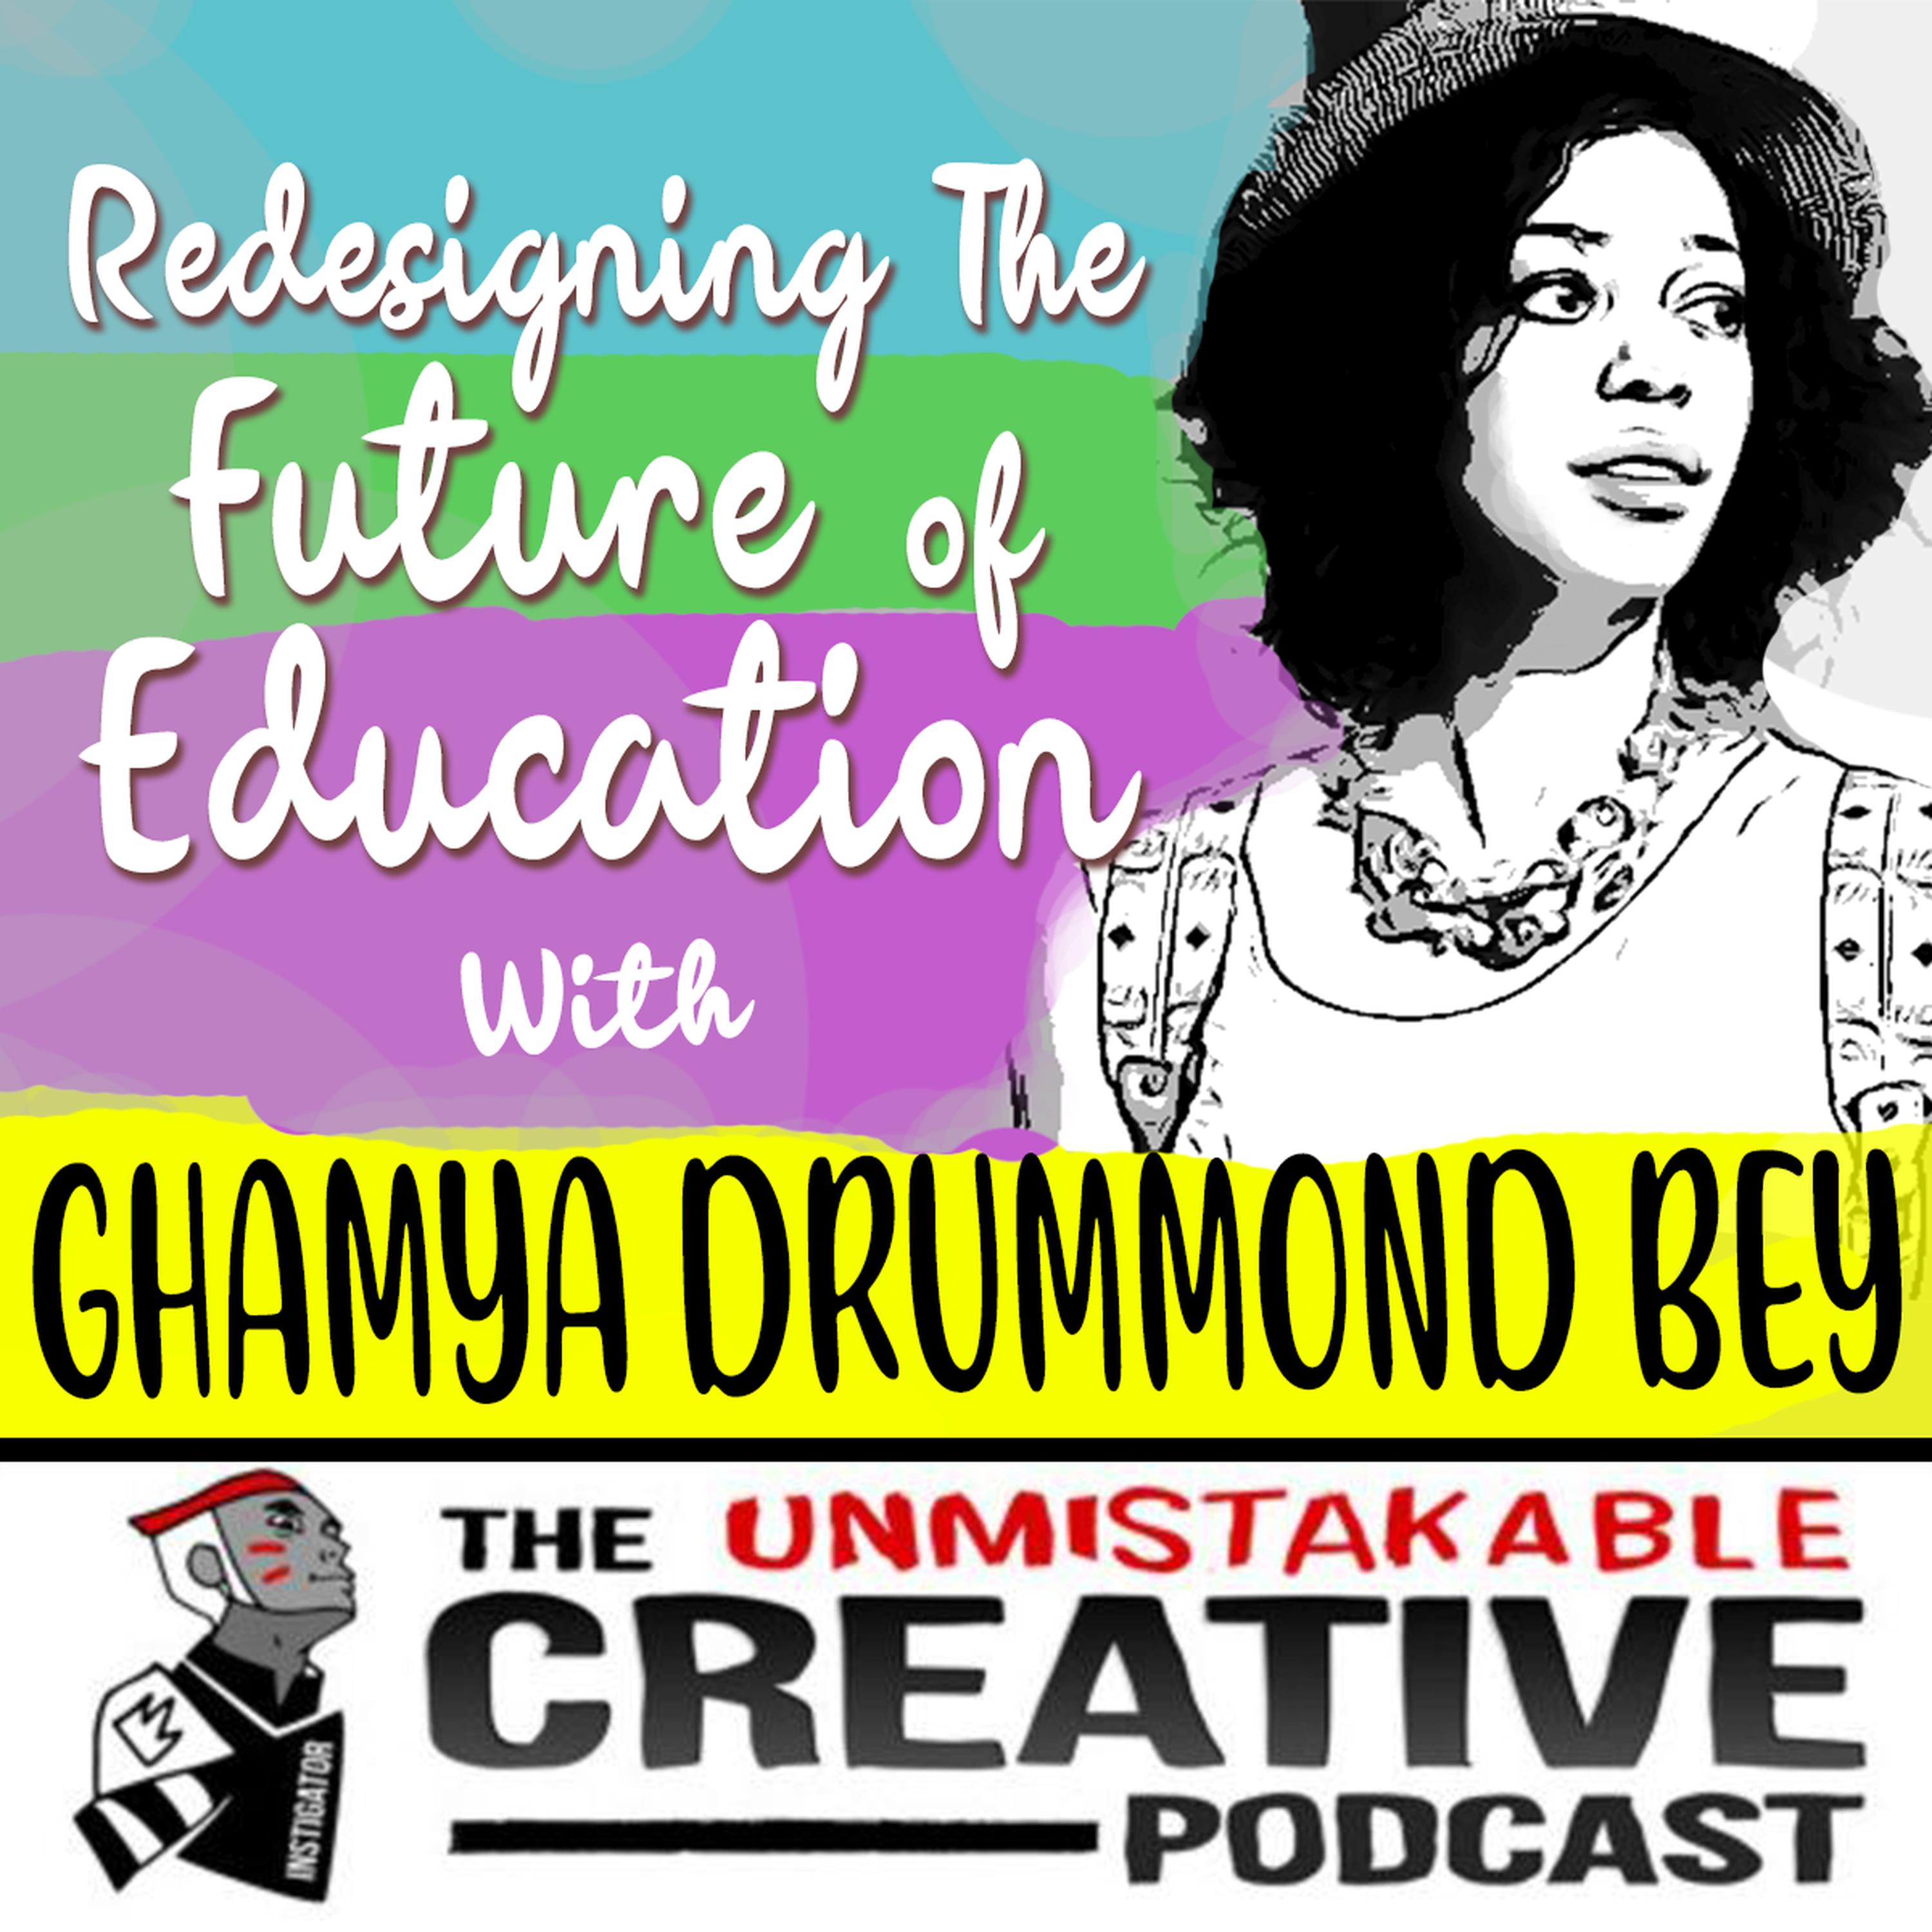 Redesigning The Future of Education with Gahmya Drummond-Bey